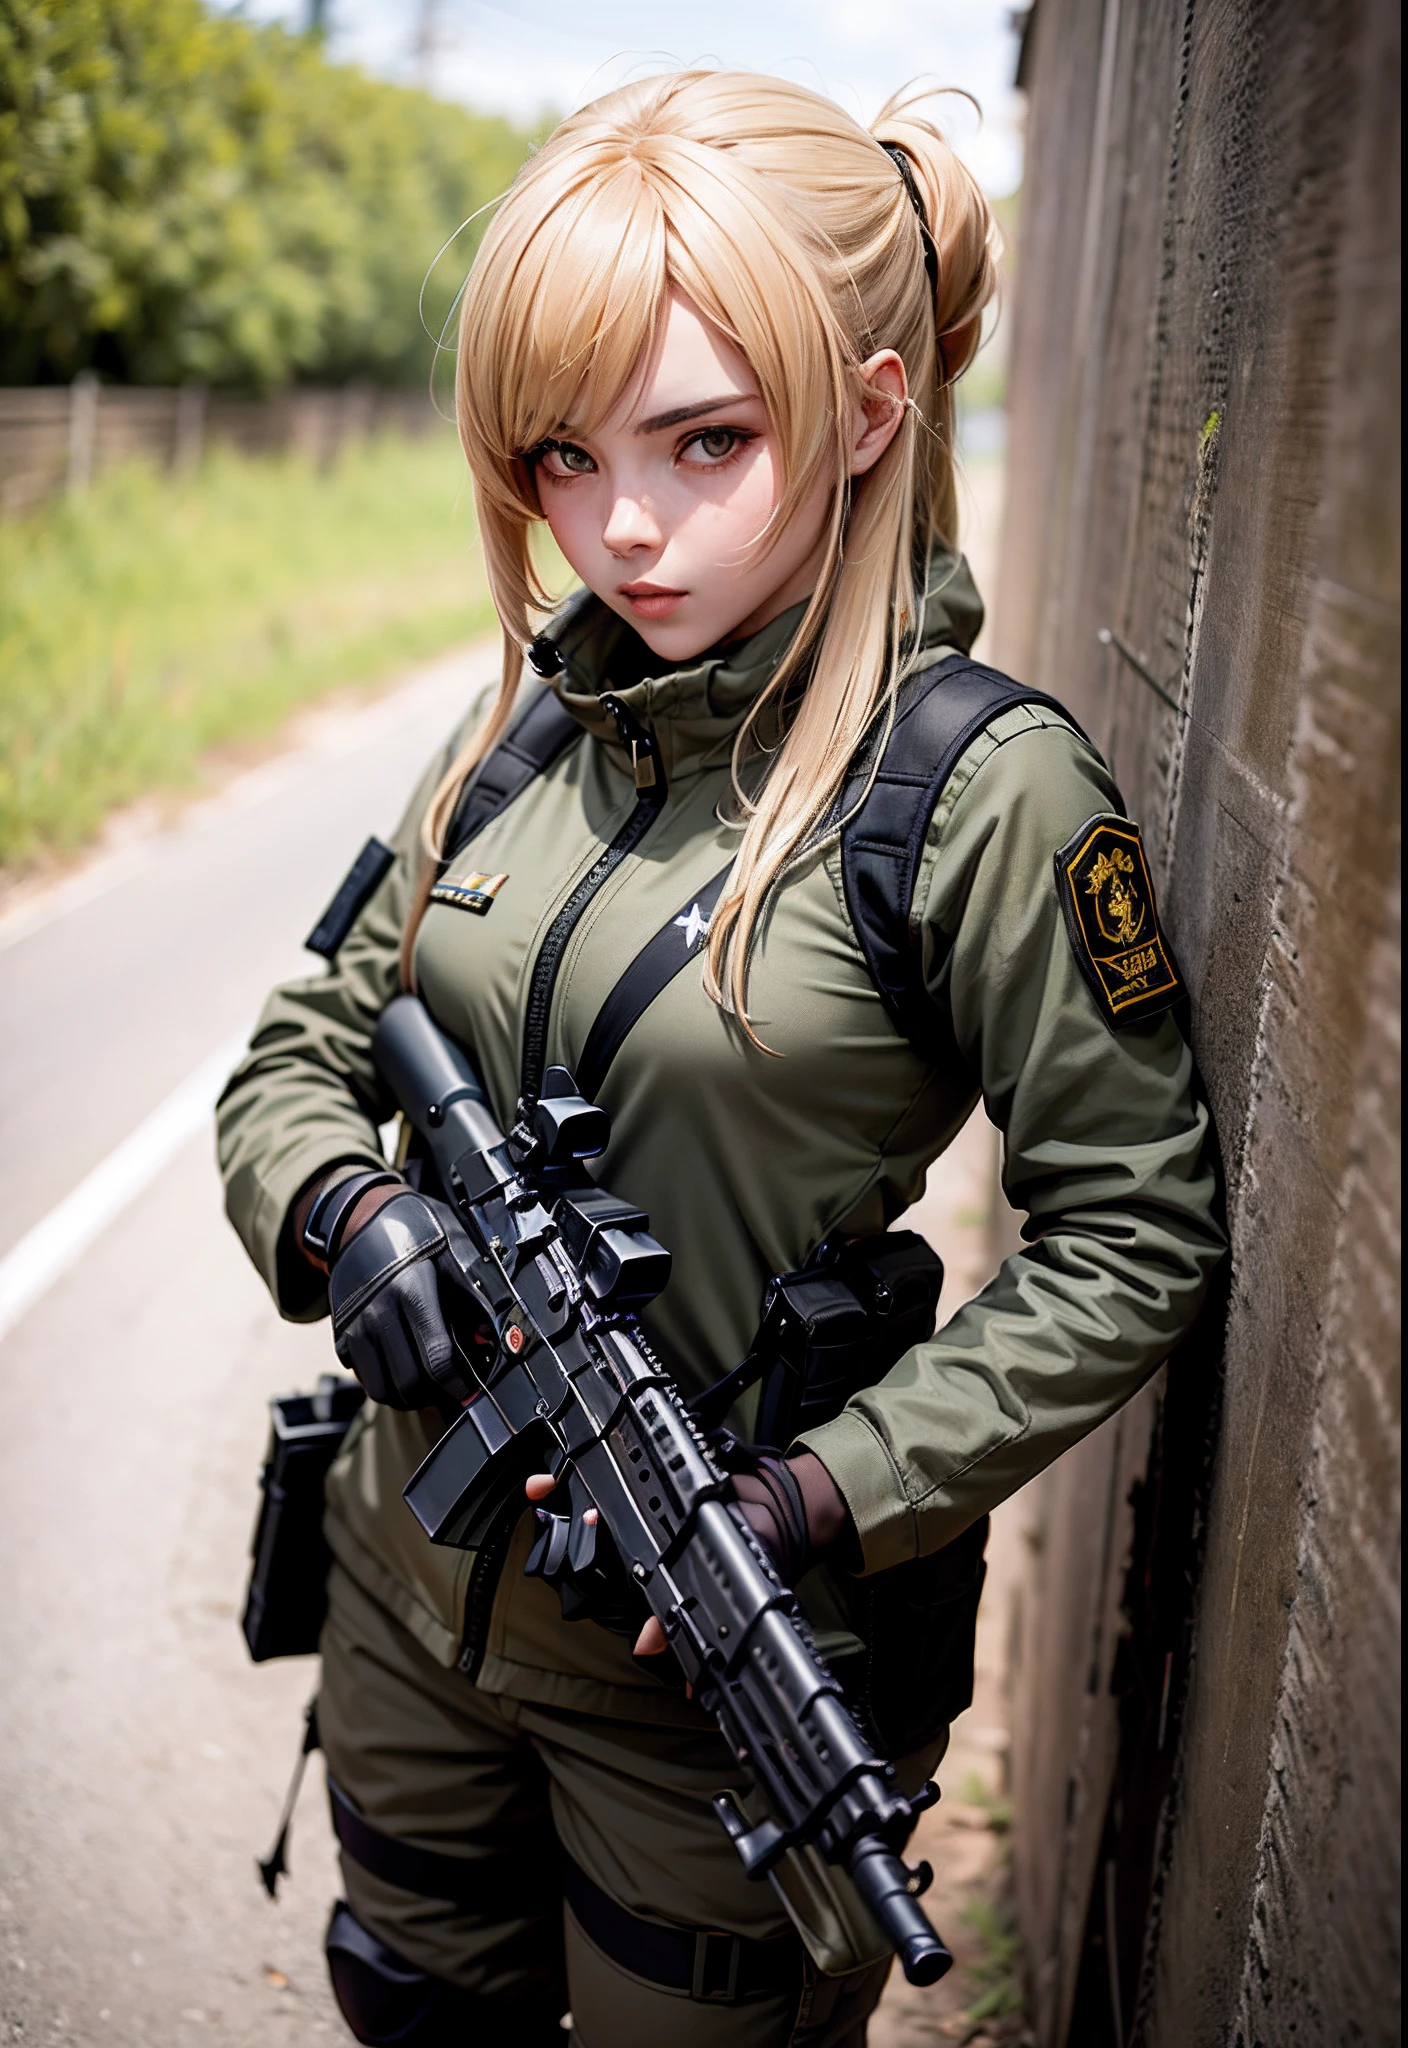 Girl in camouflage holding a rifle and walking on a dirt road, soldier girl mecanizado, infantry girl, soldier girl, heavily armed, ready for combat, a sniper girl in war,  militar, art in the style of Guweiz, m4 sopmod ii girls frontline, guweiz on artstation pixiv, dressed in tactical armor